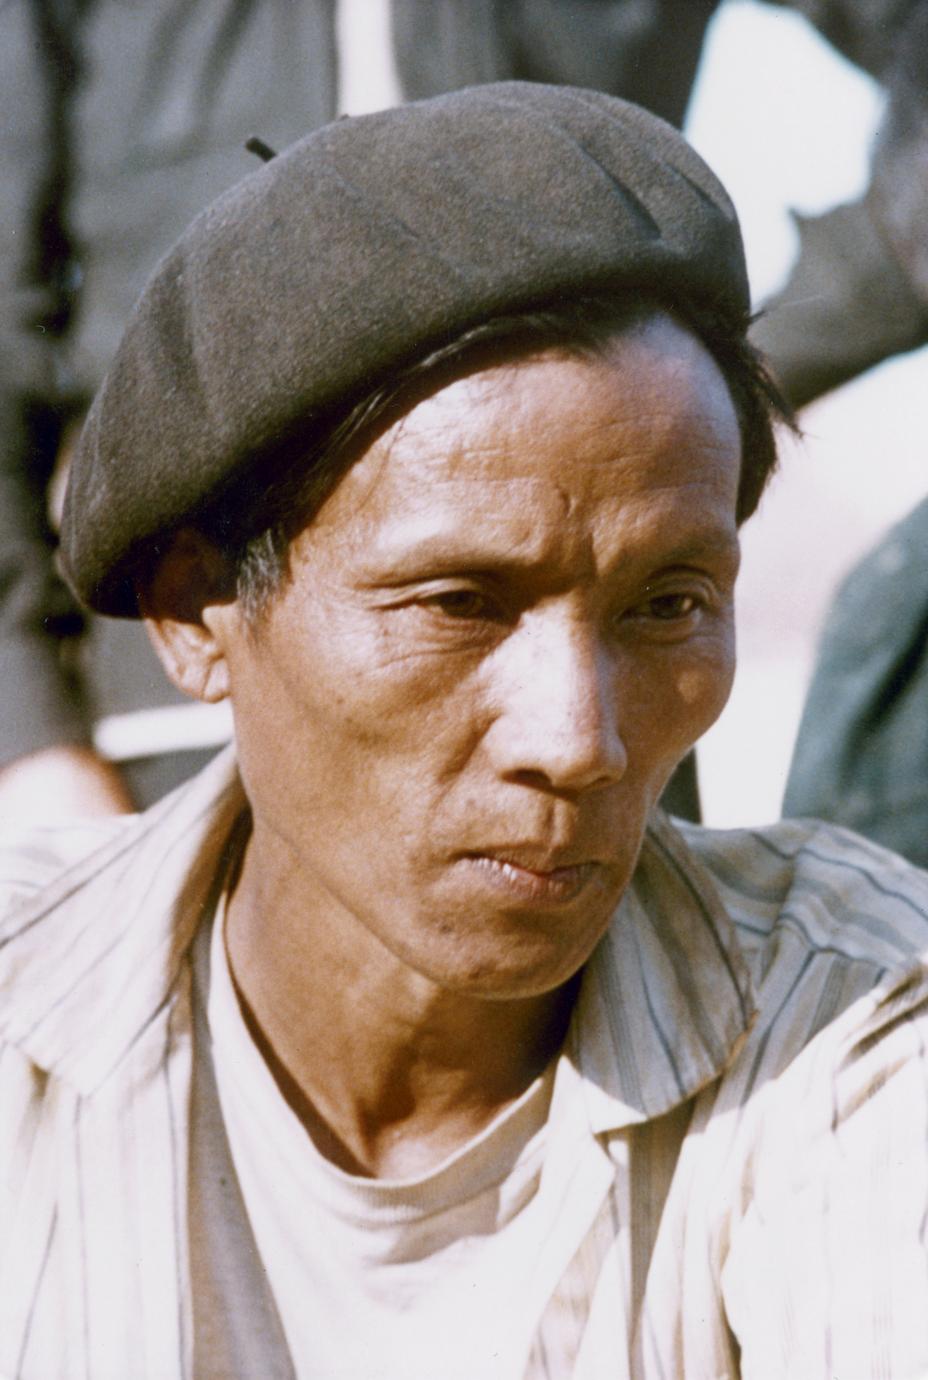 A Yao (Iu Mien) sub-district chief in Houa Khong Province